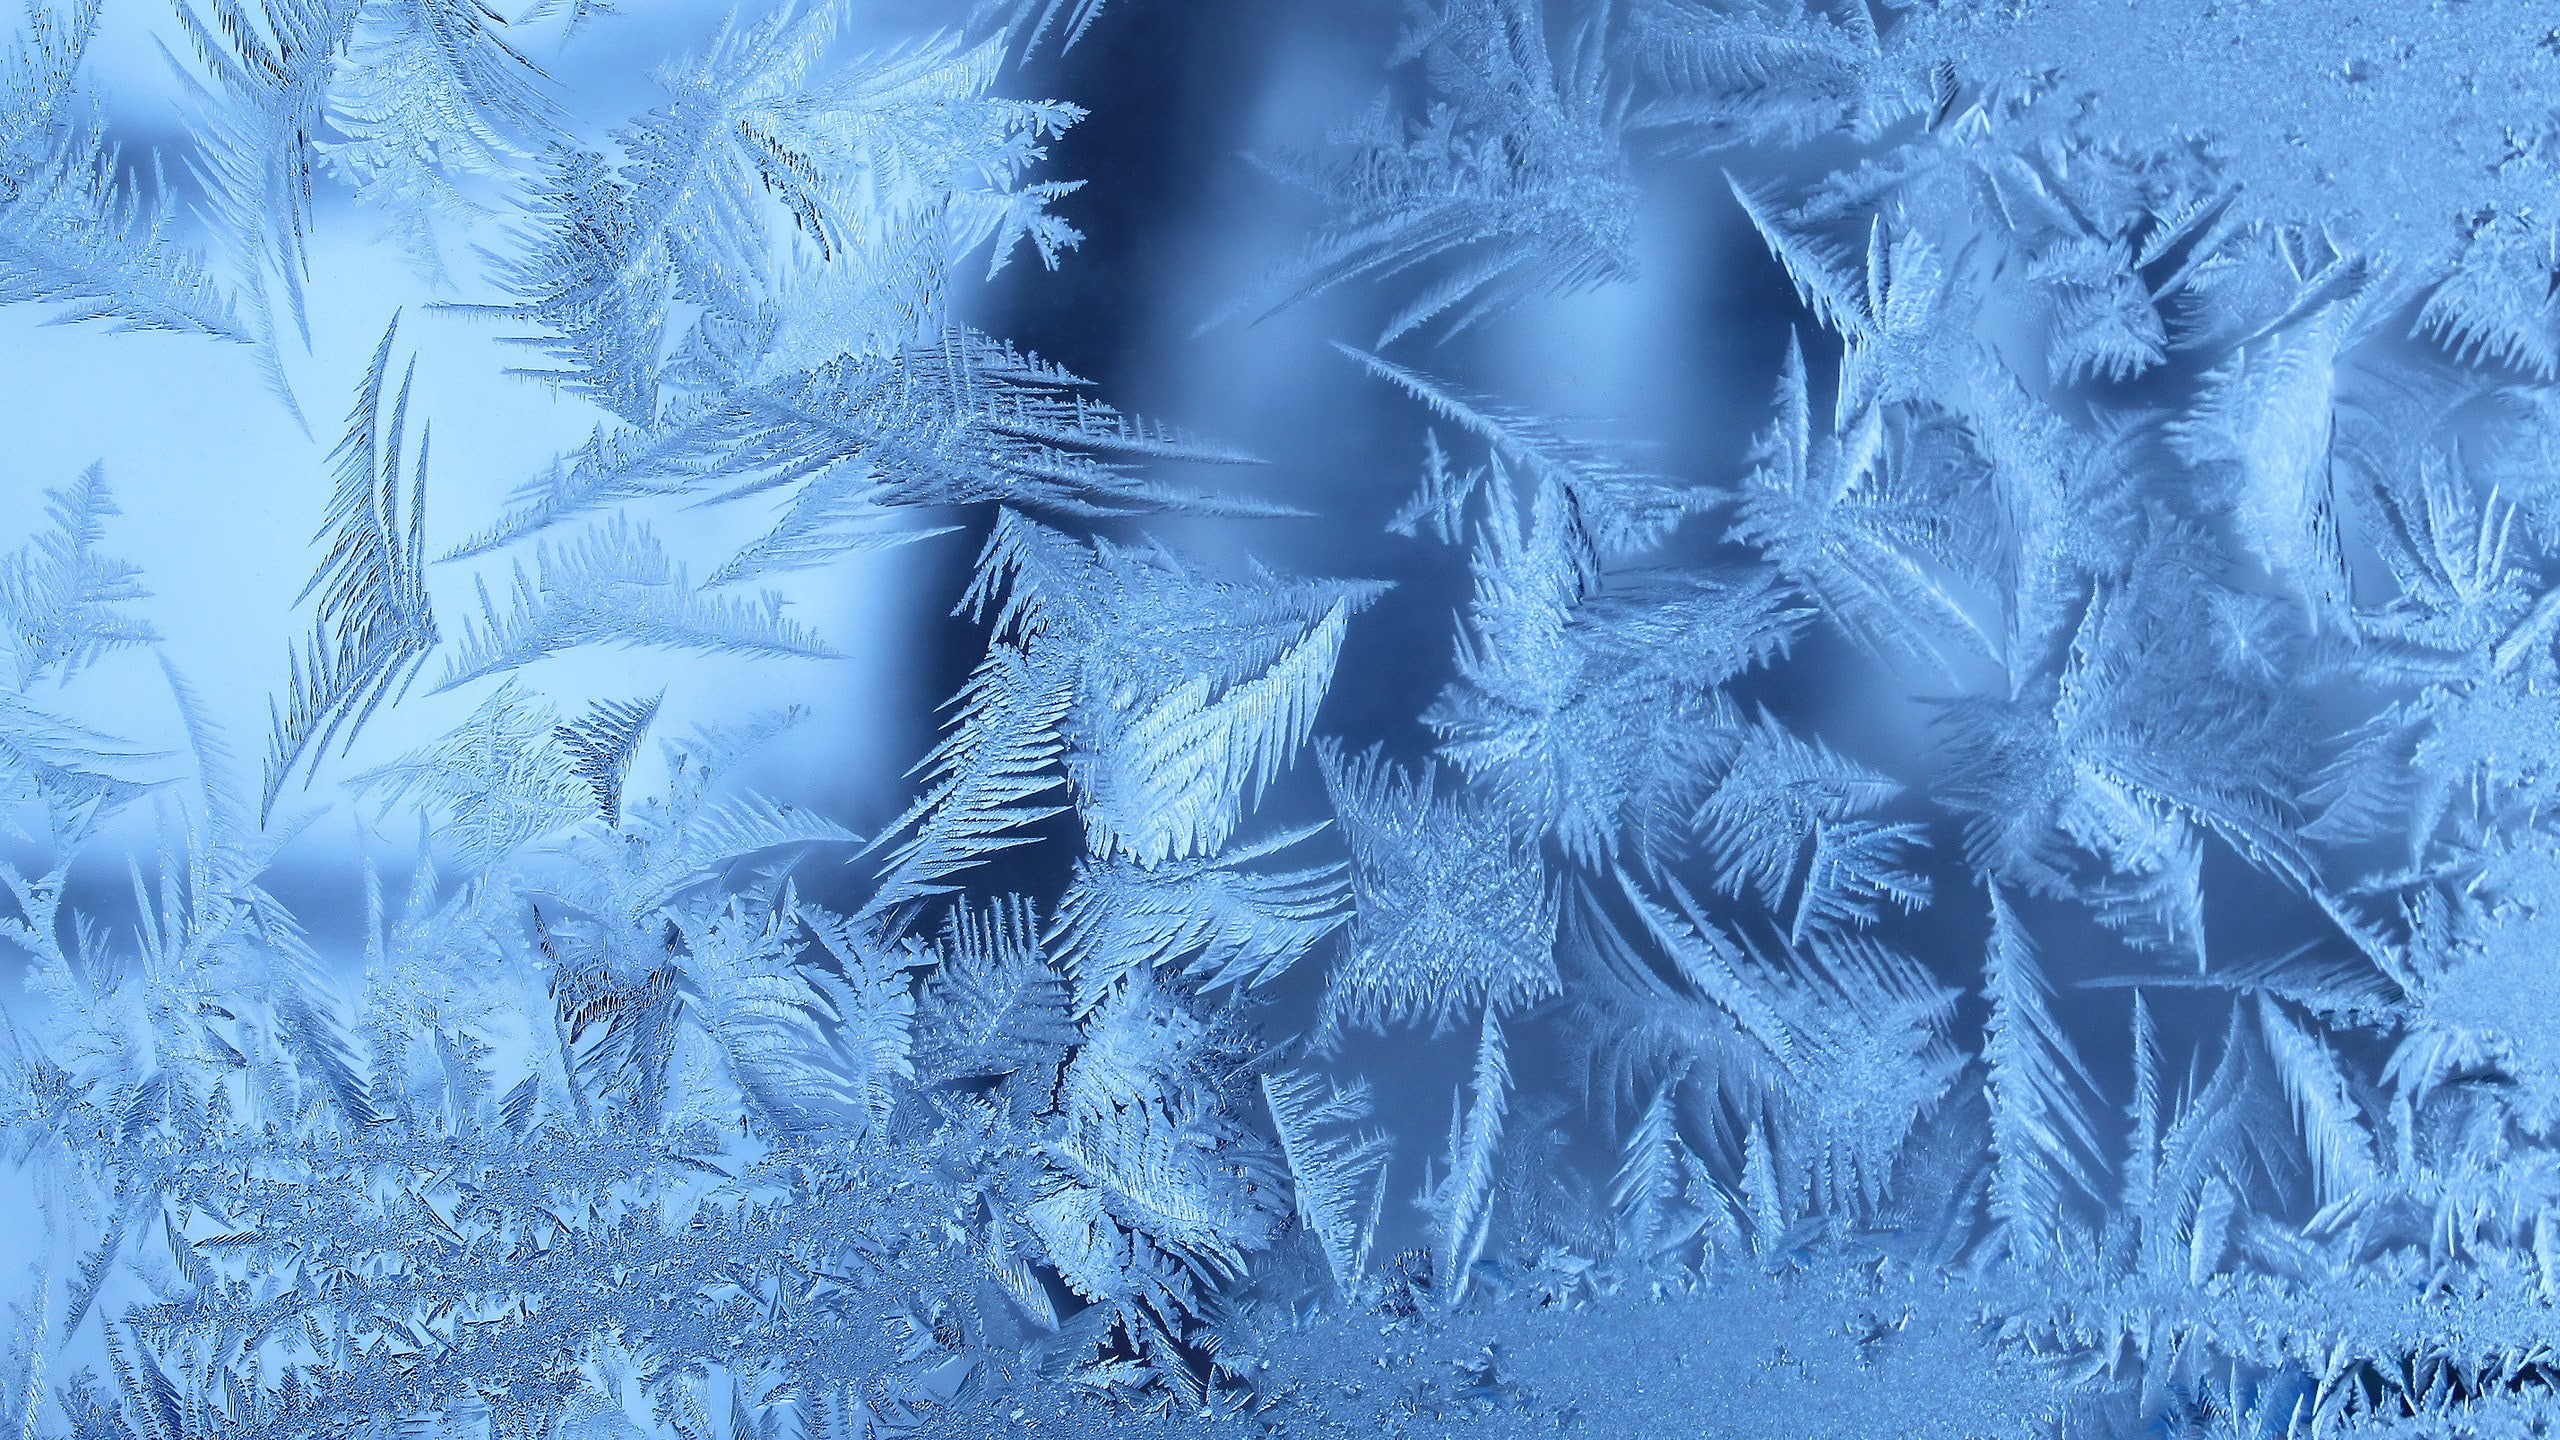 picture of frosted glass for desktop, cold temperature, winter